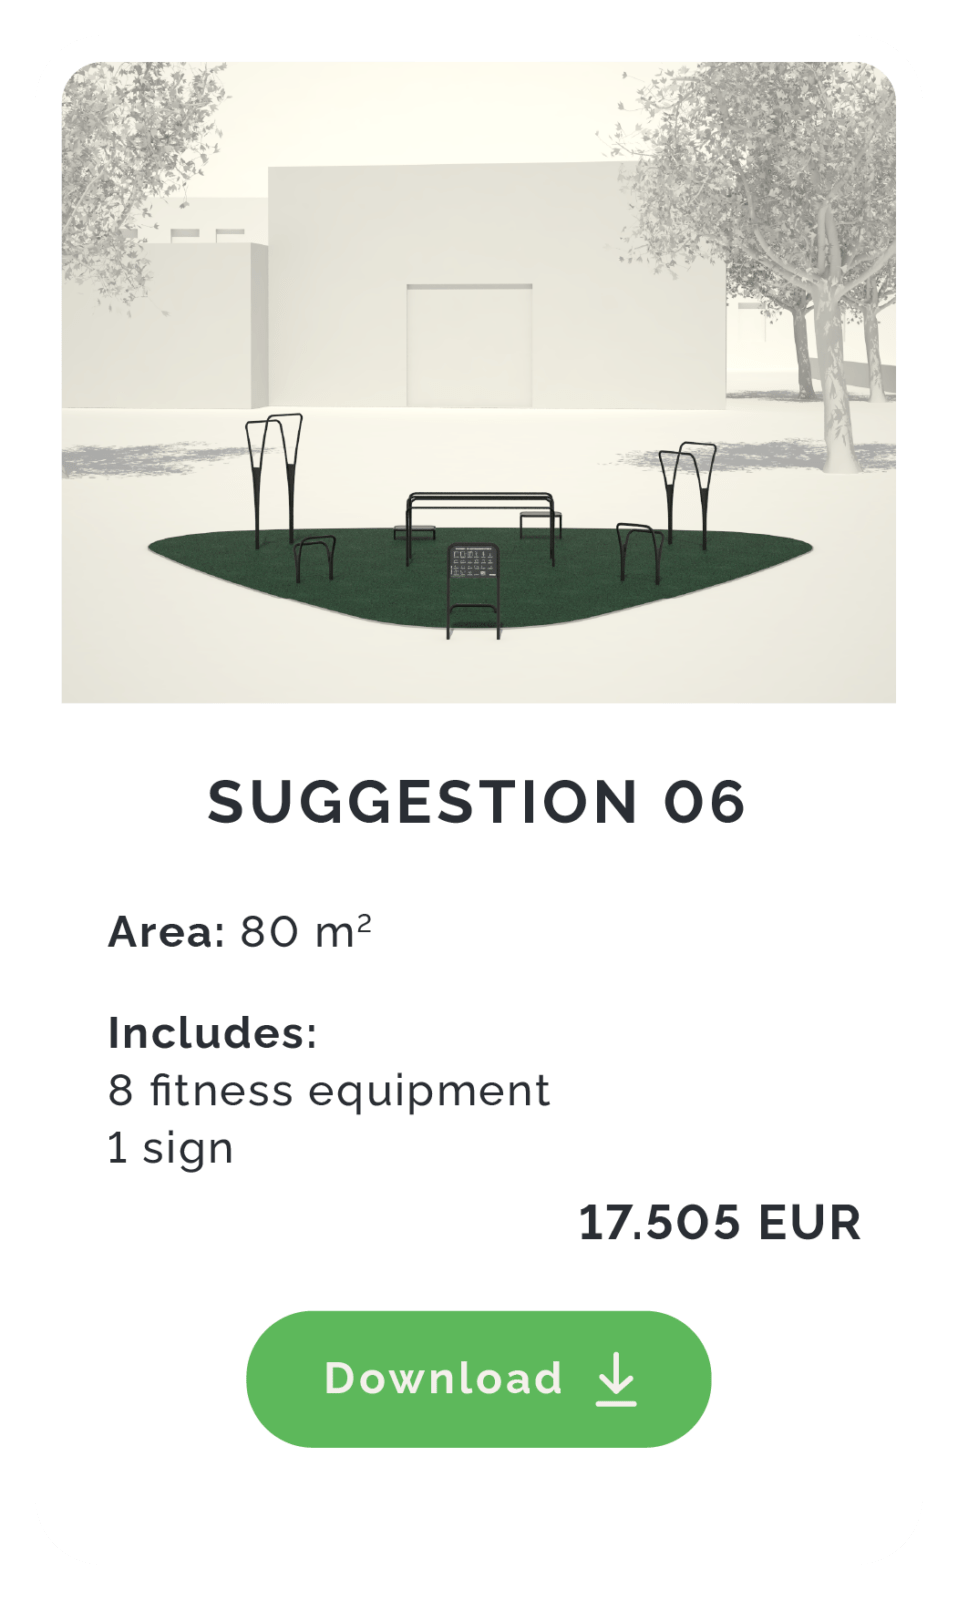 NOORD suggestion for an outdoor workout activity area